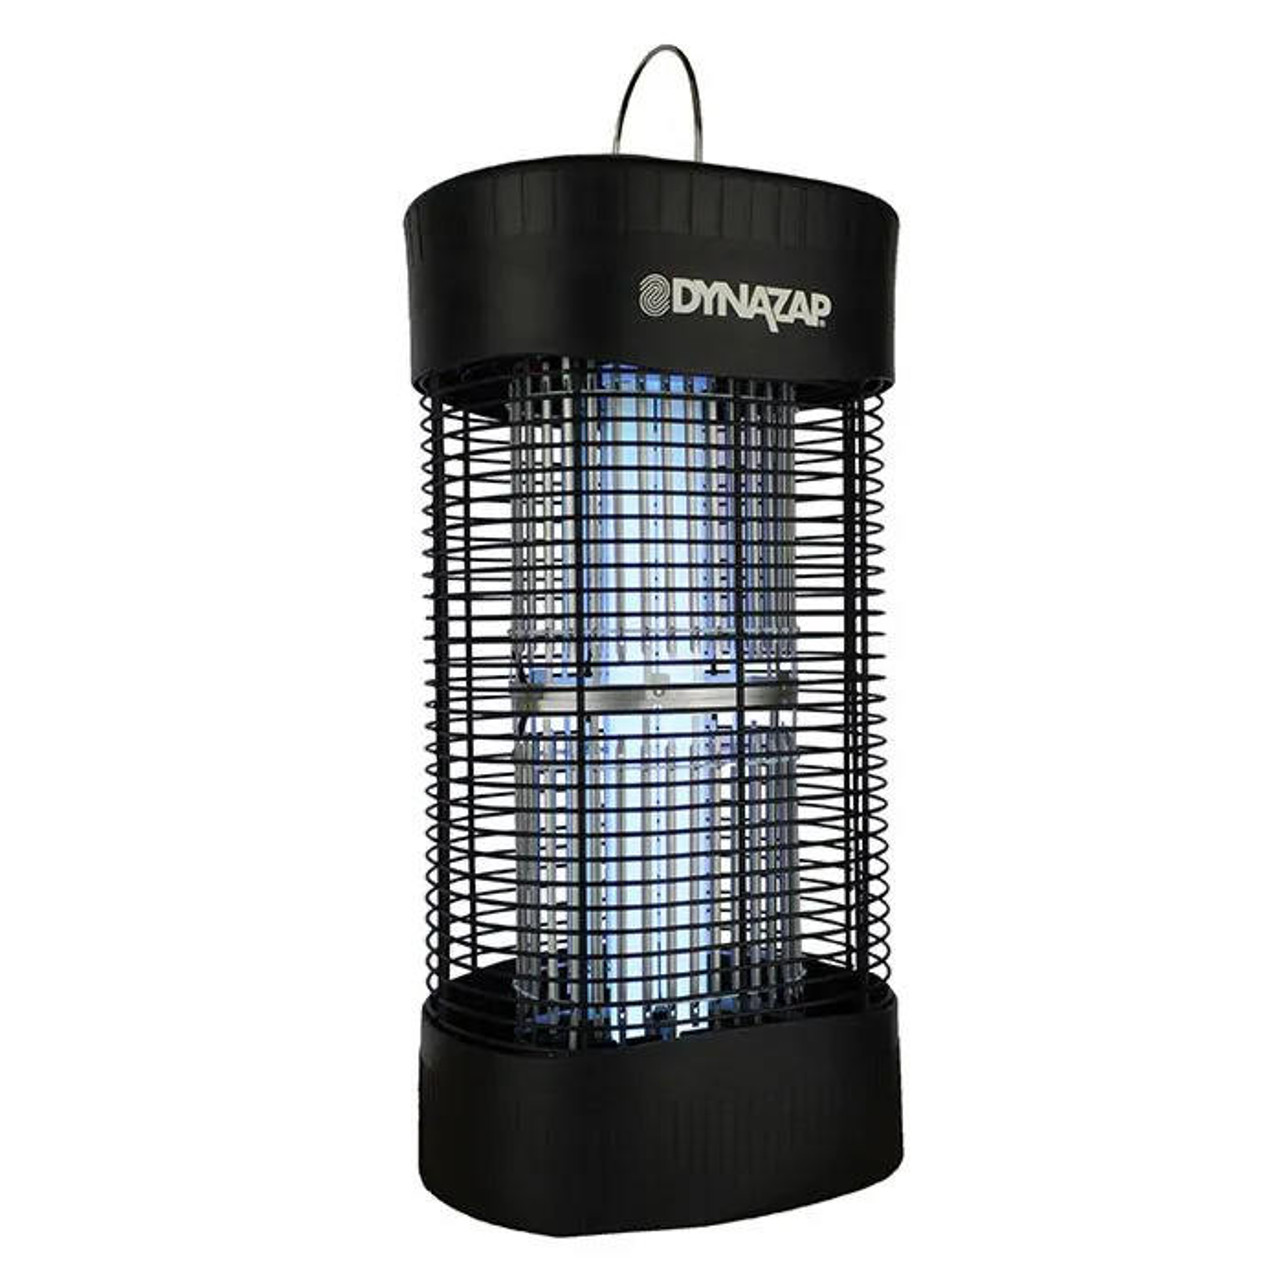 Dynatrap DynaTrap DynaZap Insect Trap & Bug Zapper | 1 Acre Coverage | Eliminate Flying Insects 